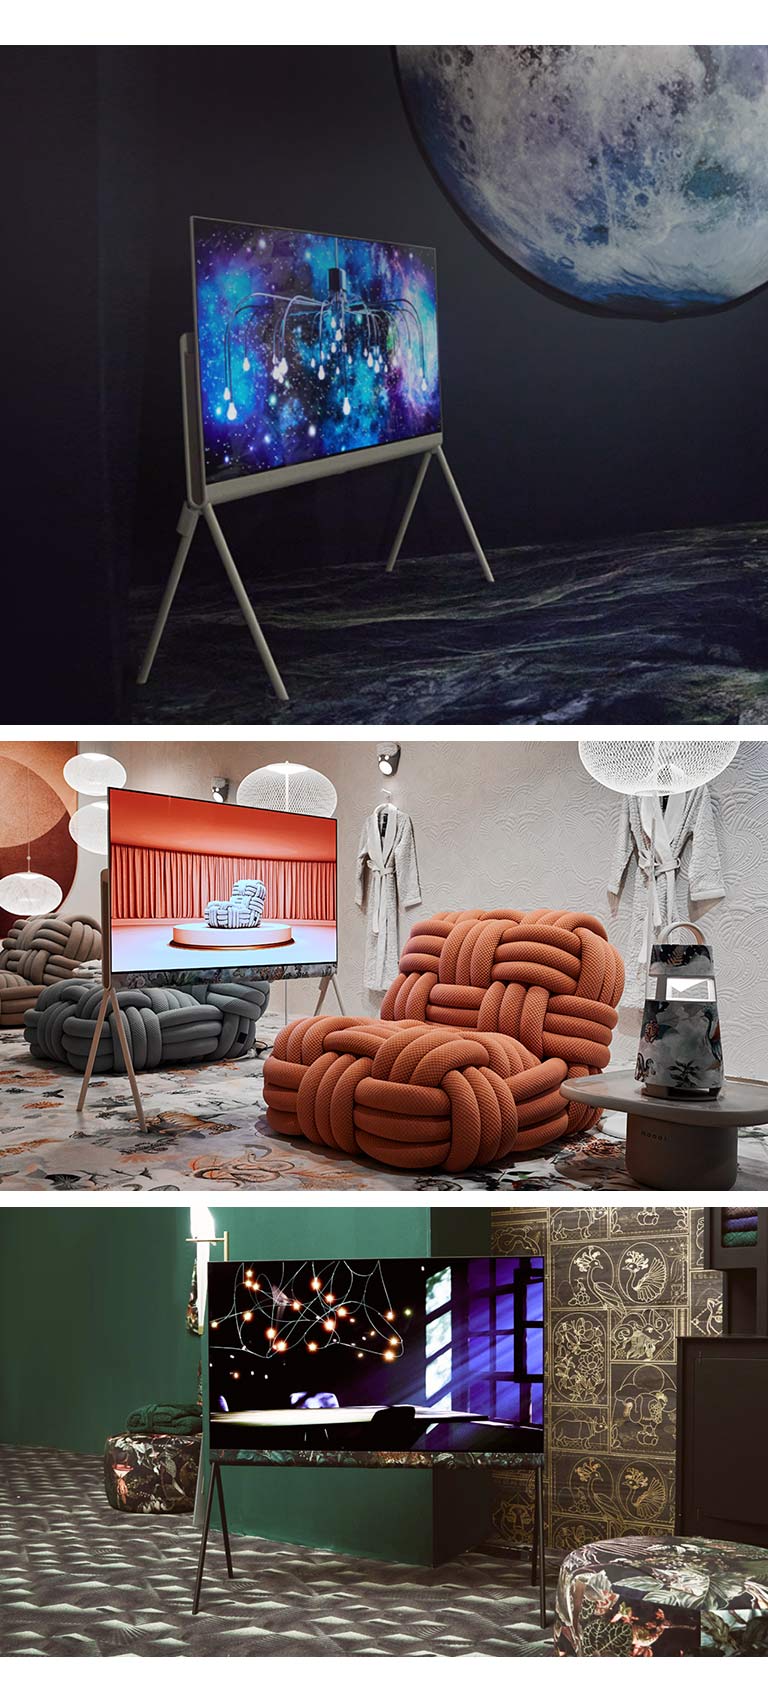 The top image shows Posé in a black space-themed room with an abstract intergalactic artwork on display. The room also has a picture of a moon and an astronaut. 	  The bottom right image shows Posé in an opulent emerald green room. The TV shows light casting over a table through windowpanes on the screen. The room also features black and gold ornate tiles and black floral patterned textile stools. The bottom left image shows Posé in a cream room with hints of colors. The room has terracotta and charcoal-colored chunky woven sofa chairs, white ball-shaped light fixtures, and bathing robes hanging on the wall. The TV shows an image of the same charcoal sofa chair on a platform in a terracotta-colored room.